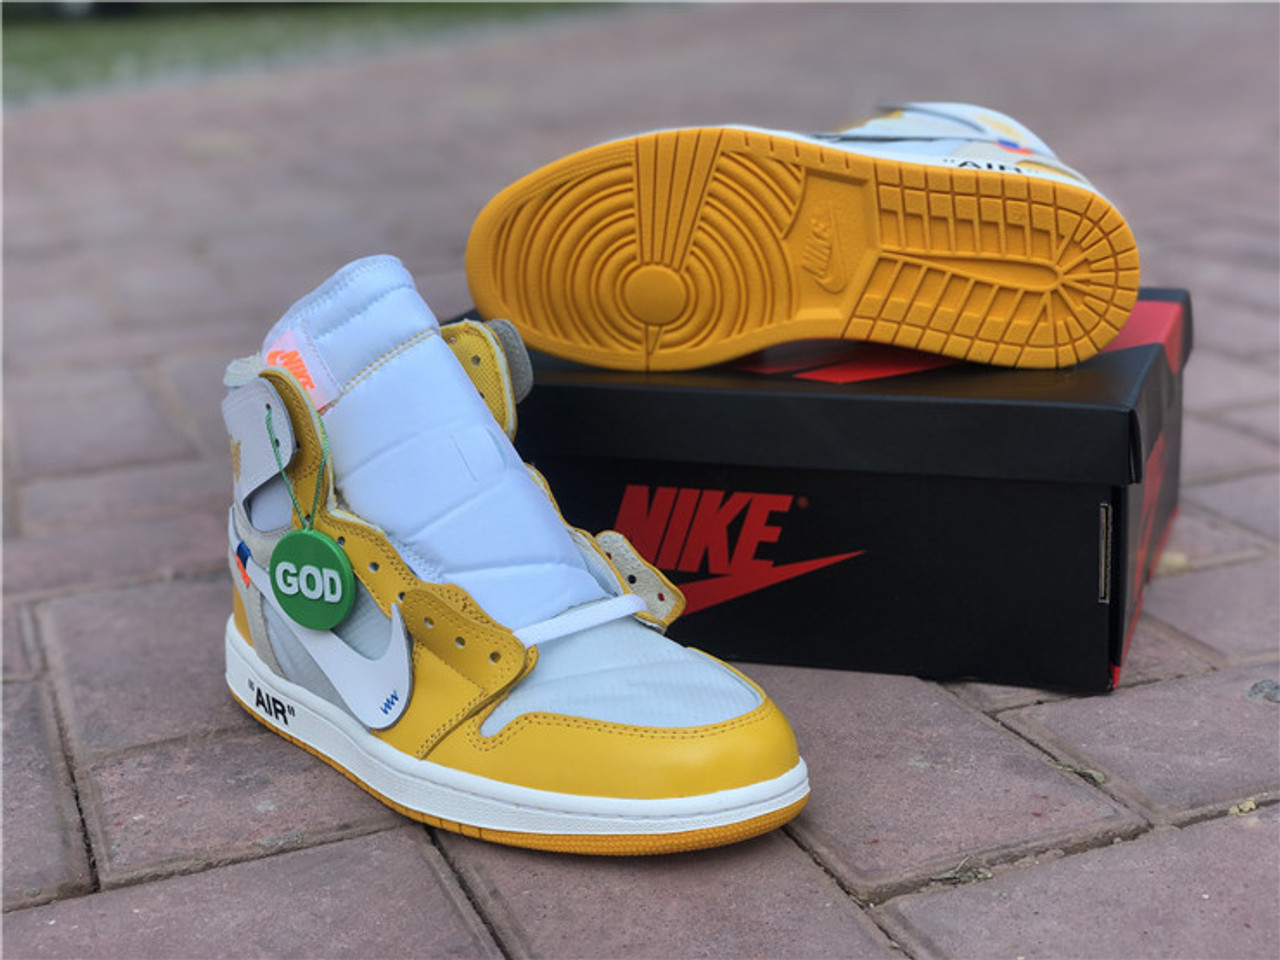 where to buy the best UA High quality replica off-white x nike air jordan 1 “CANARY YELLOW” colorway sneakers Hypedripz is the best high quality trusted clone replica fake designer